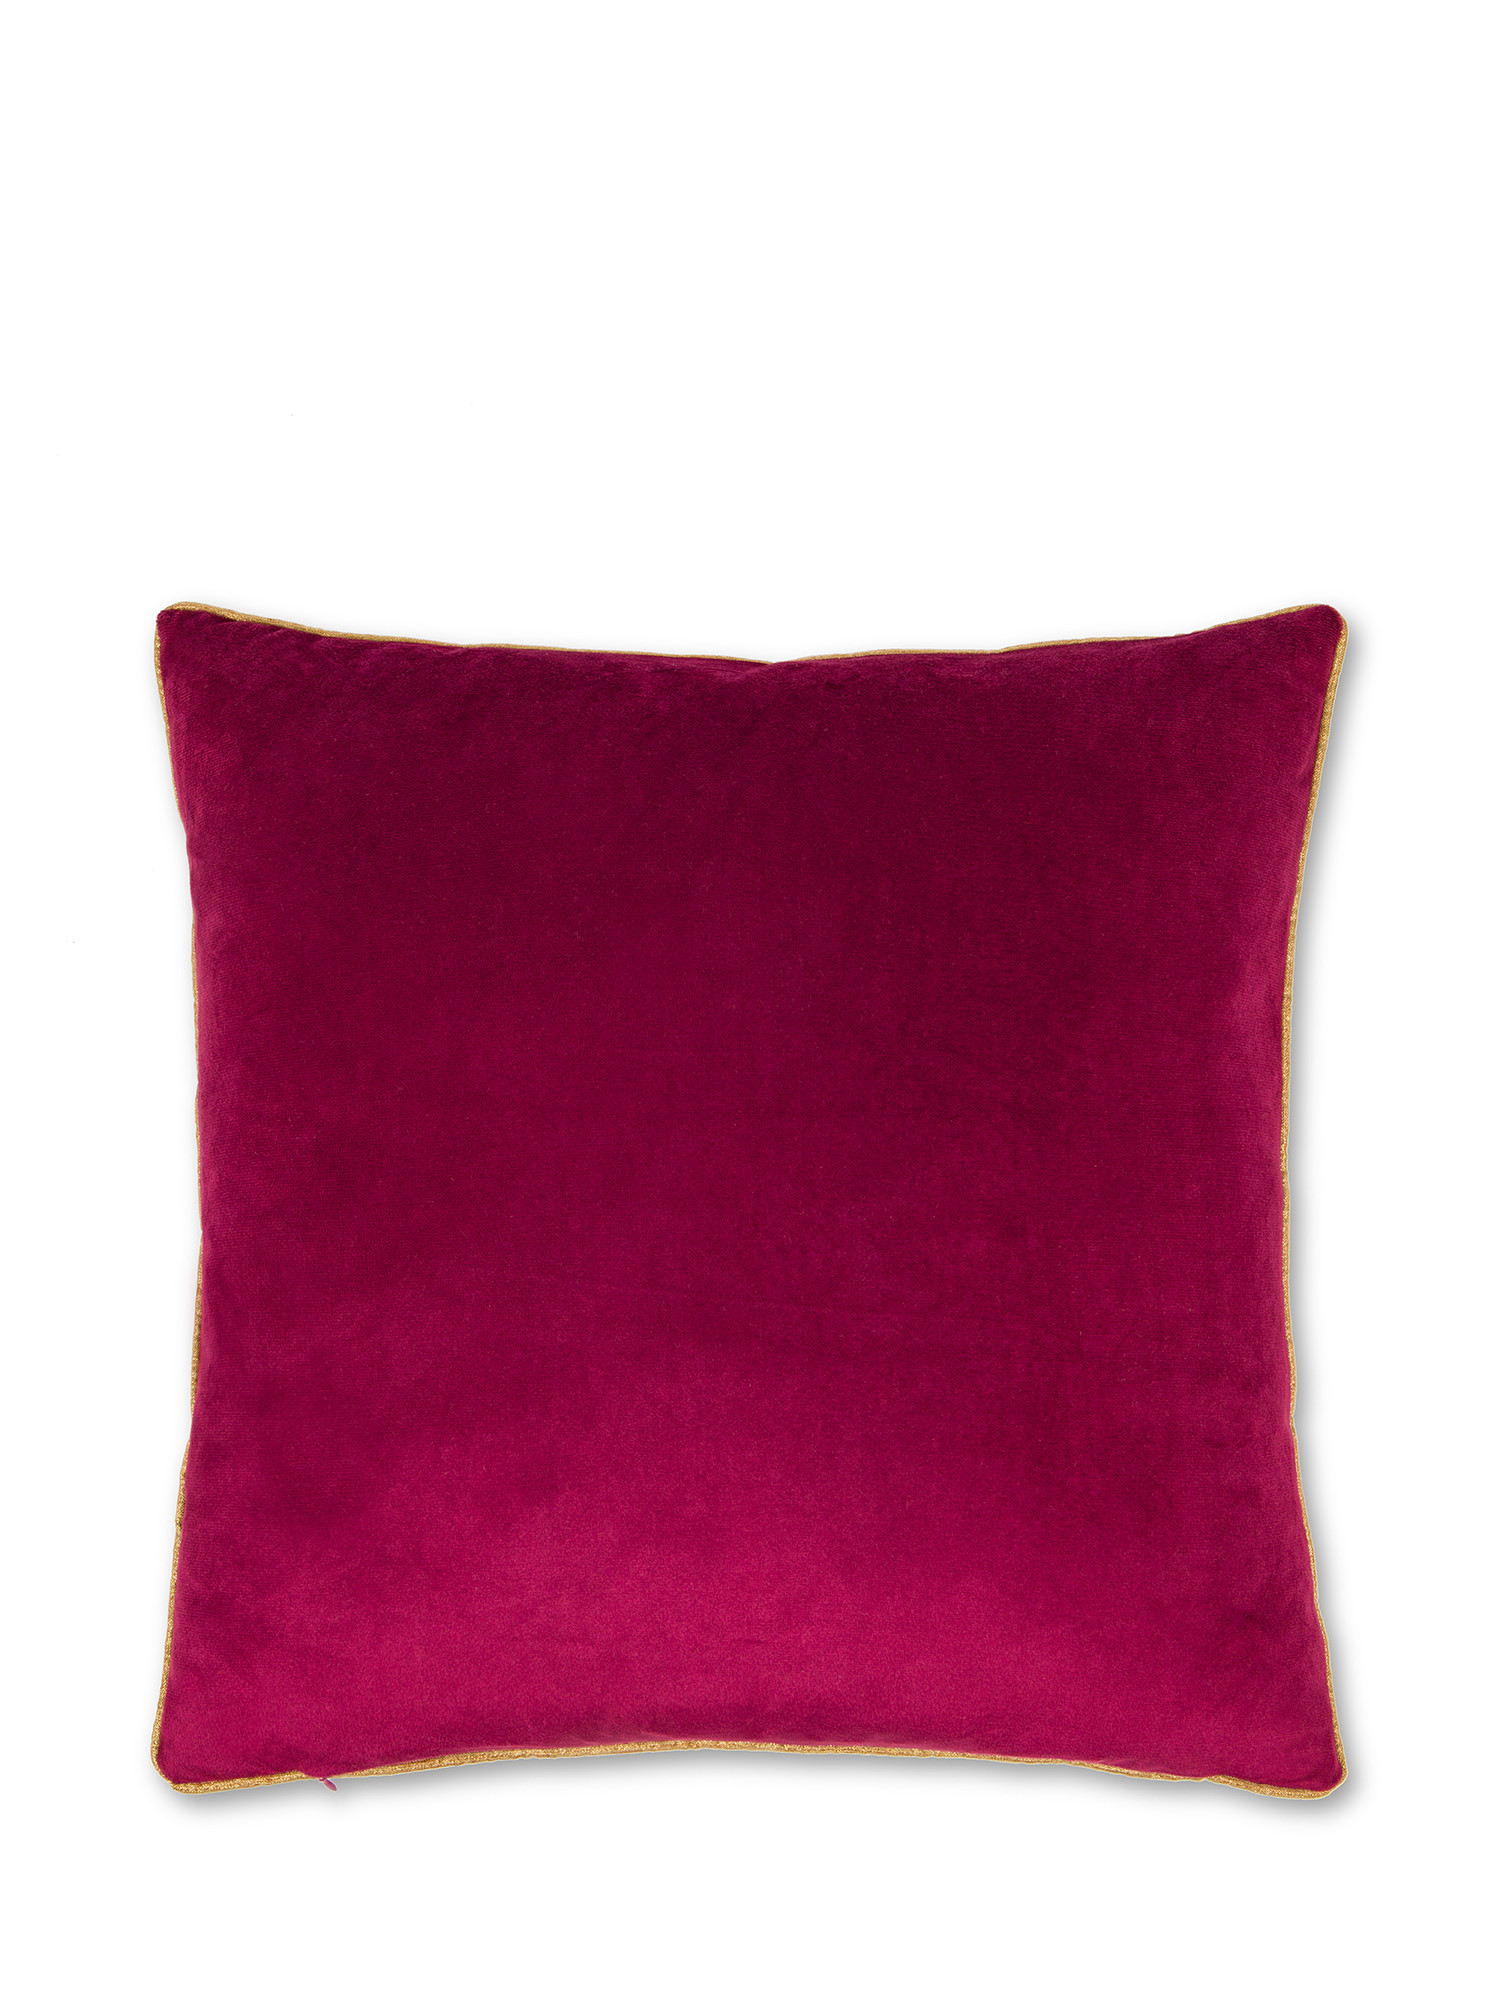 Cuscino velluto ricamato con piping 45X45cm, Rosso bordeaux, large image number 1